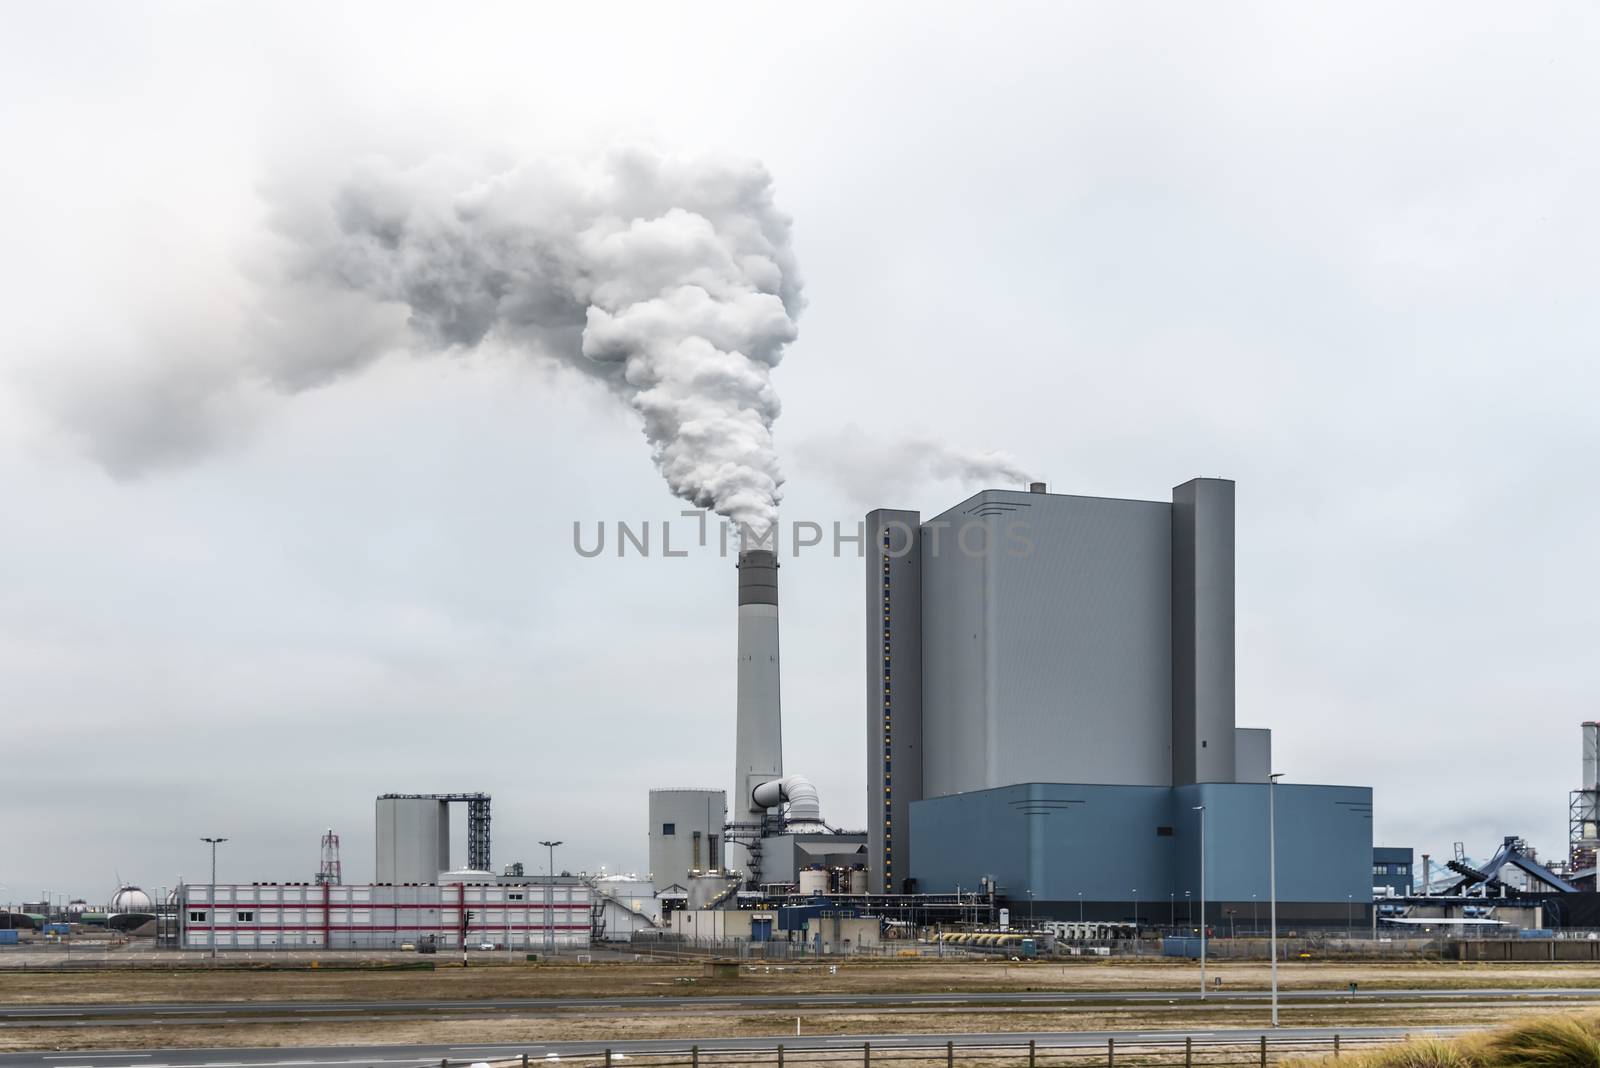 Rotterdam power station splitting chem-tray in the sky through its hight chimney in the industrial area in the Maasvlakte, Netherlands by ankorlight